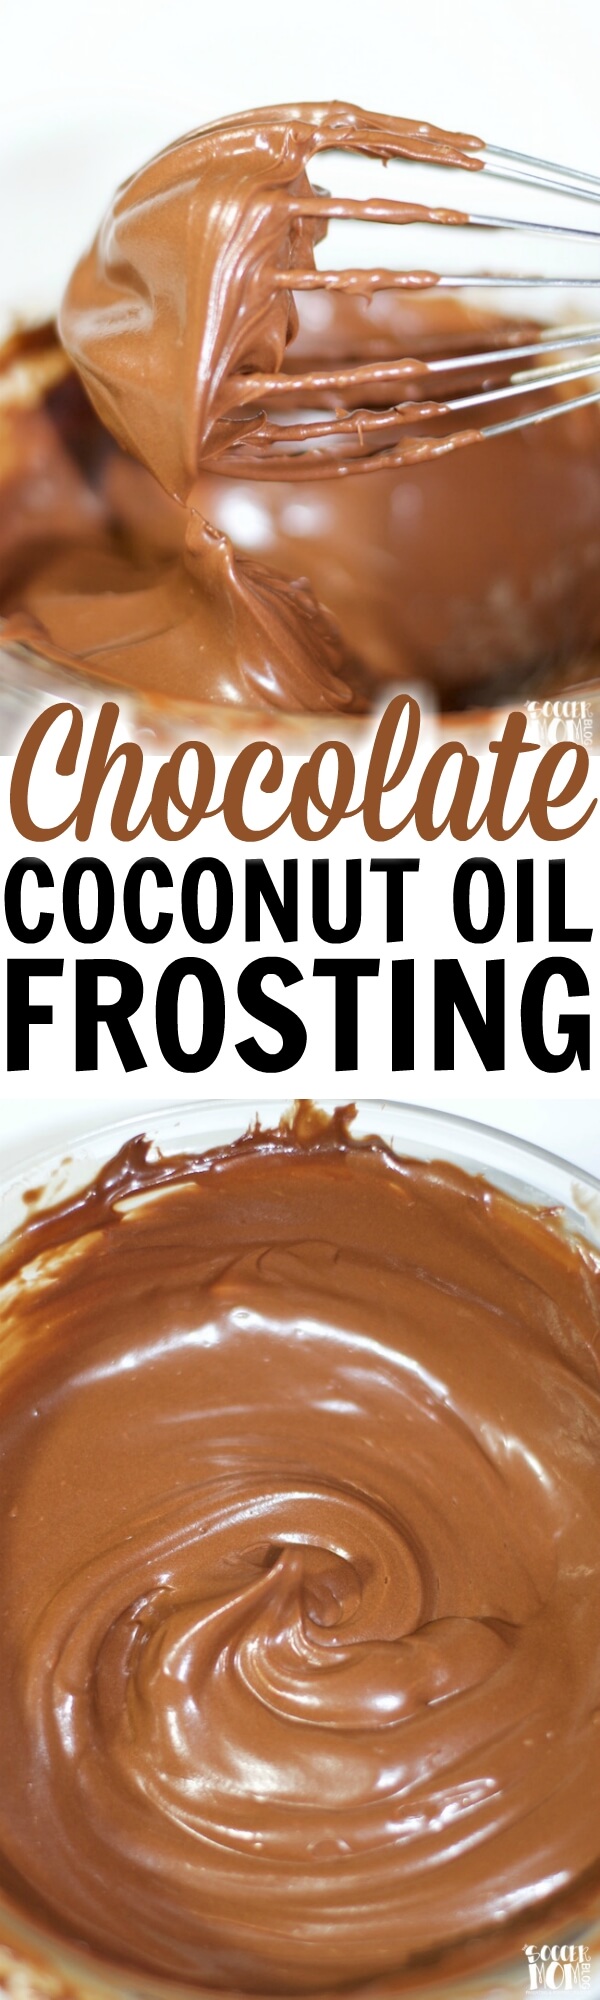 It really is like dessert magic!! You only need 2 ingredients to create this decadent Dark Chocolate Coconut Oil Icing AND it makes two types of icing!